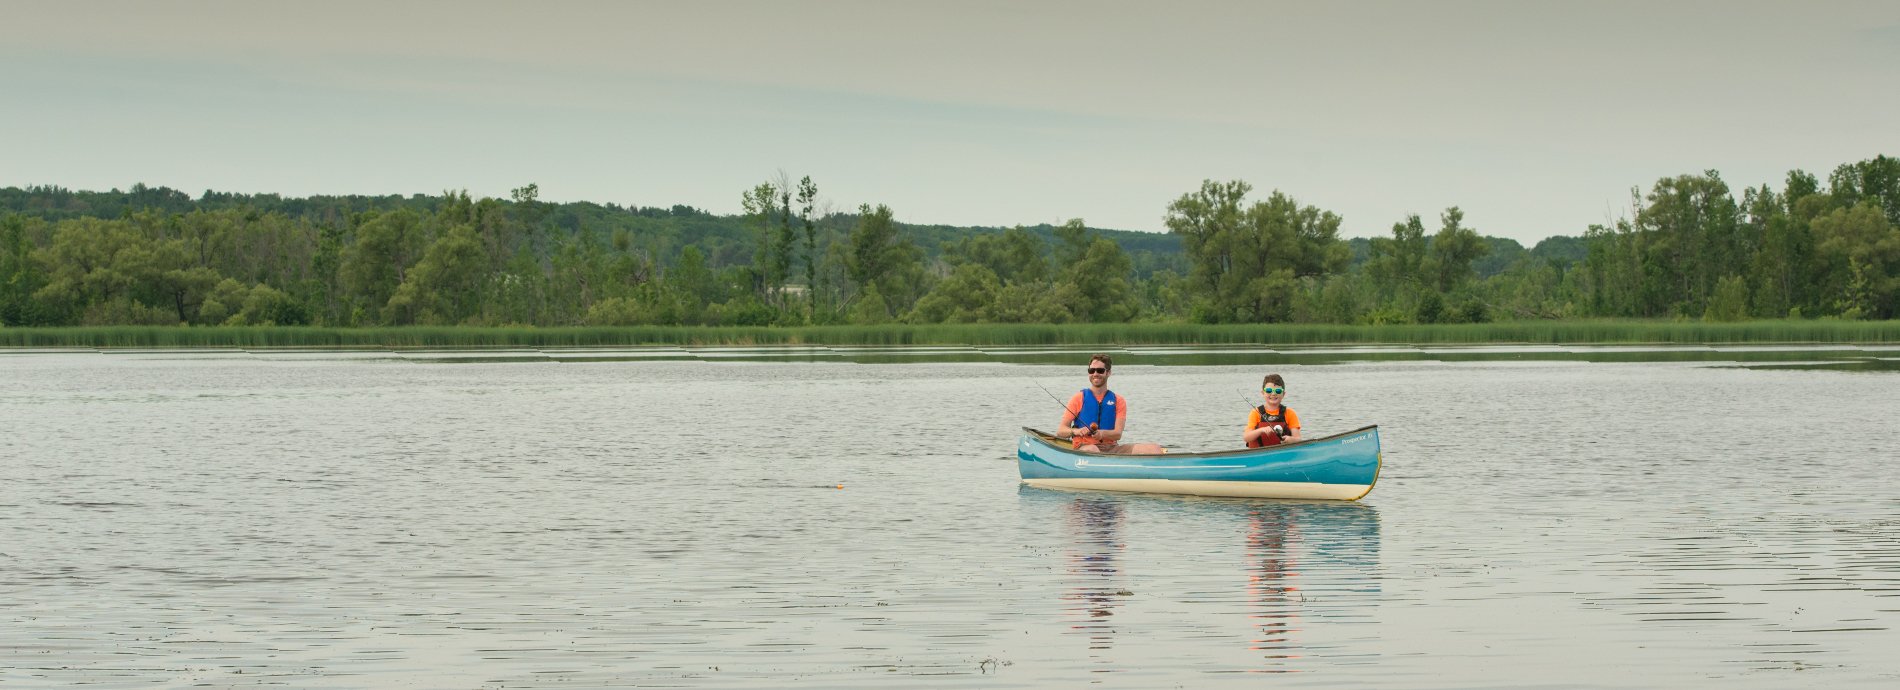 two people fishing from a canoe